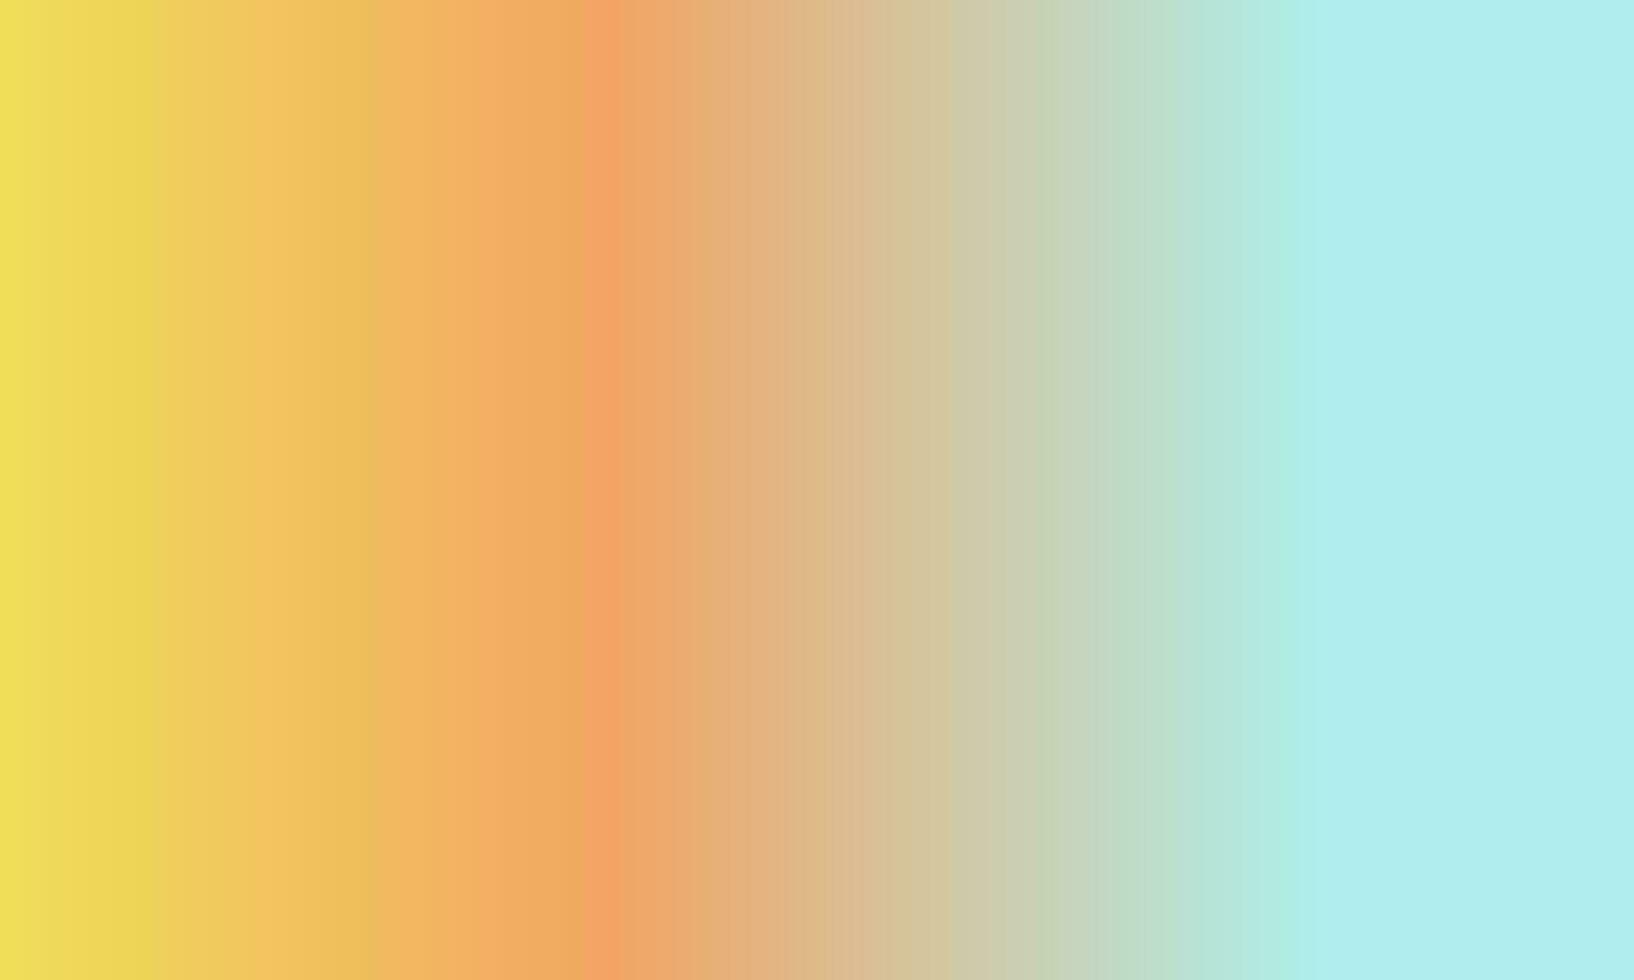 Design simple highlighter blue,yellow and orange gradient color illustration background photo